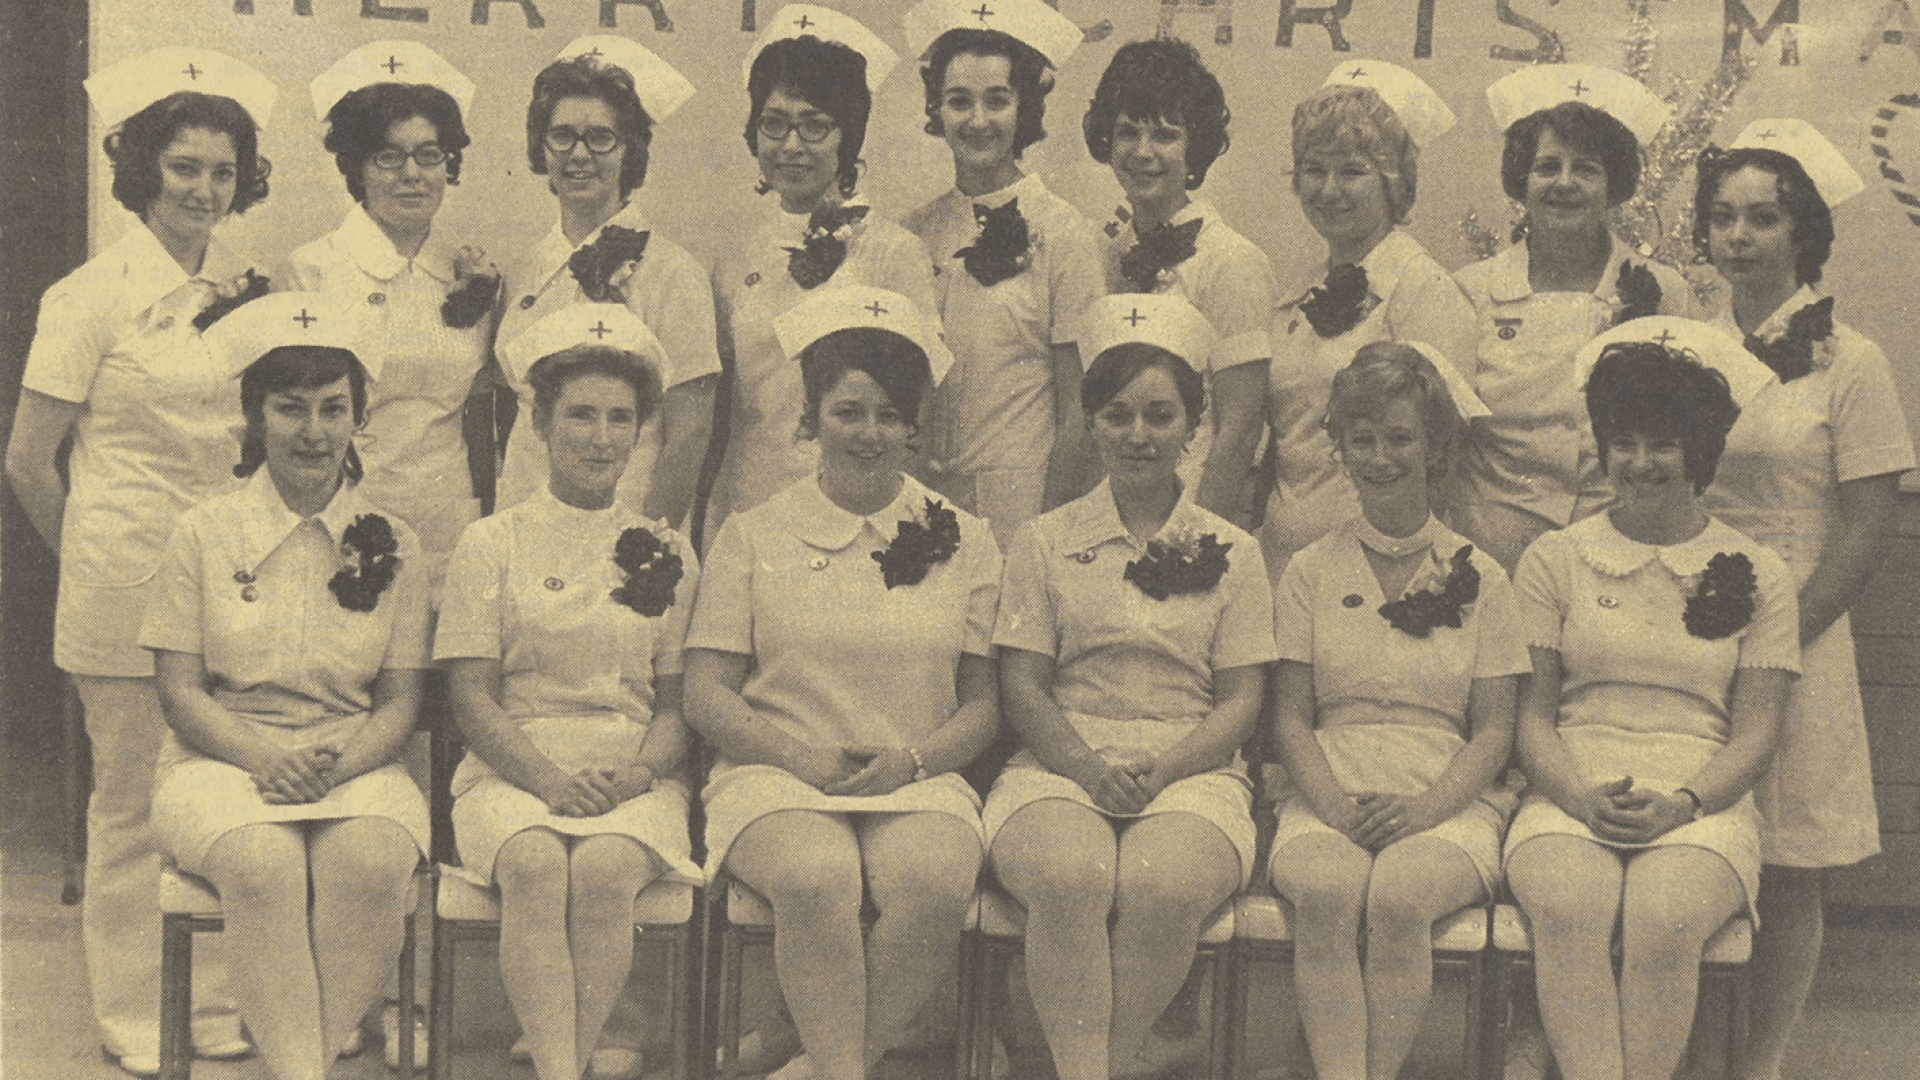 A past photo of nursing students